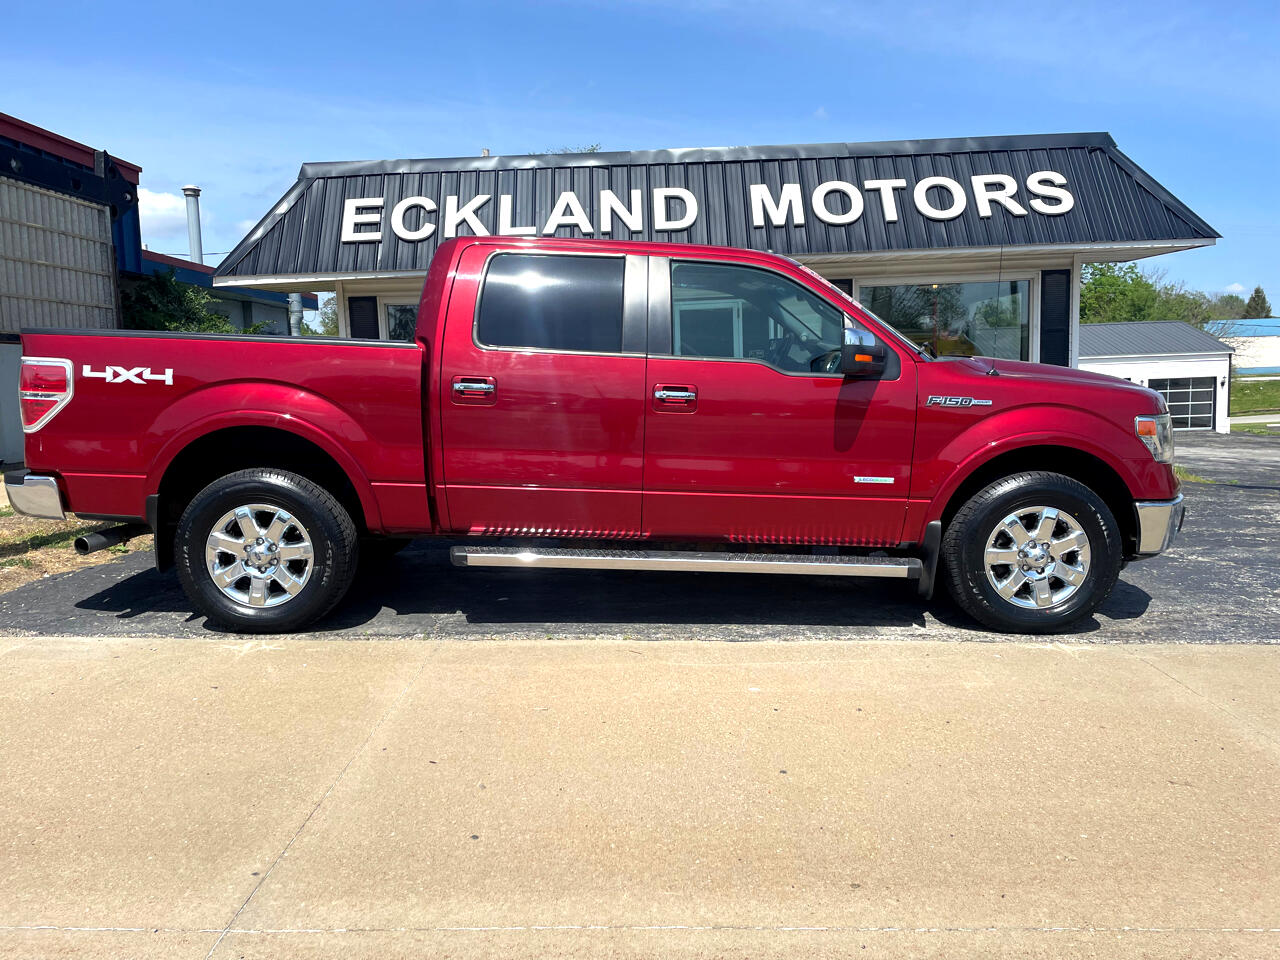 2013 Ford F-150 Lariat SuperCrew 5.5-ft. Bed 4WD